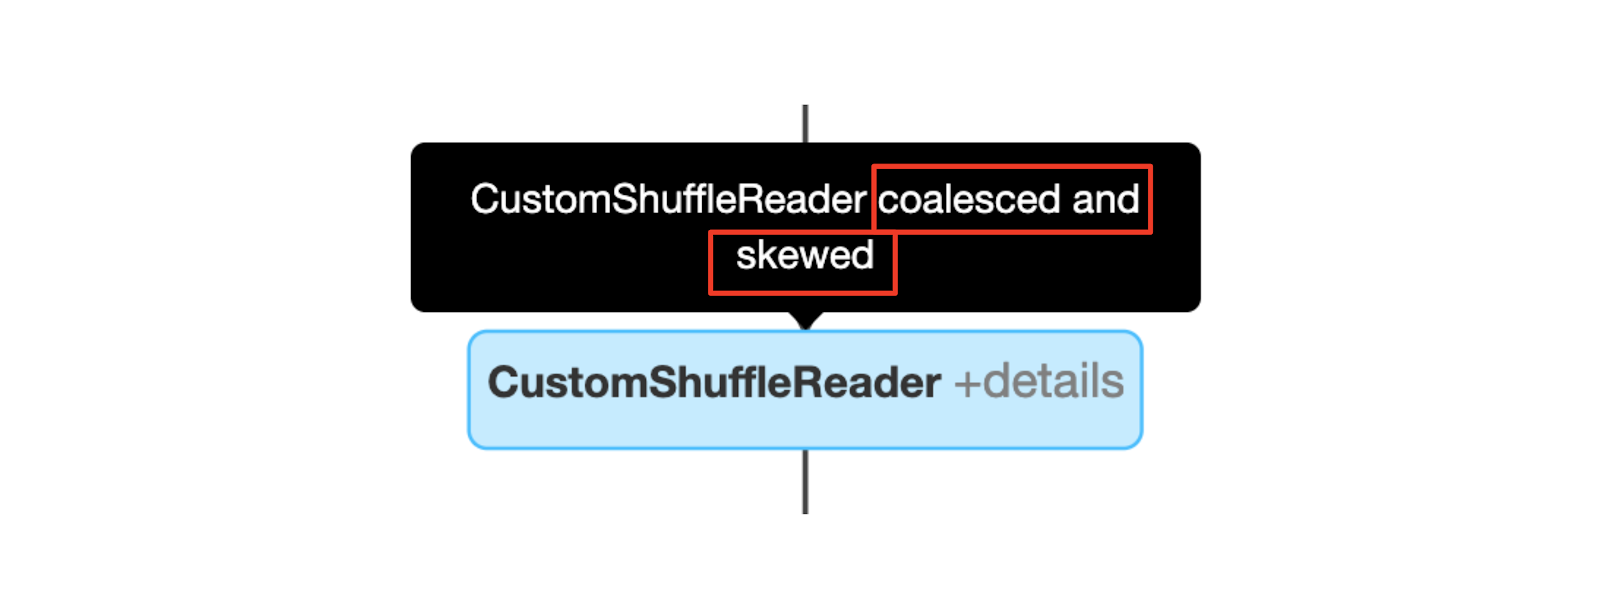 The `coalesced` and `skewed` effects can take place simultaneously, meaning AQE can both detect and coalesce partition size and handle data skew before a sort-merge join.